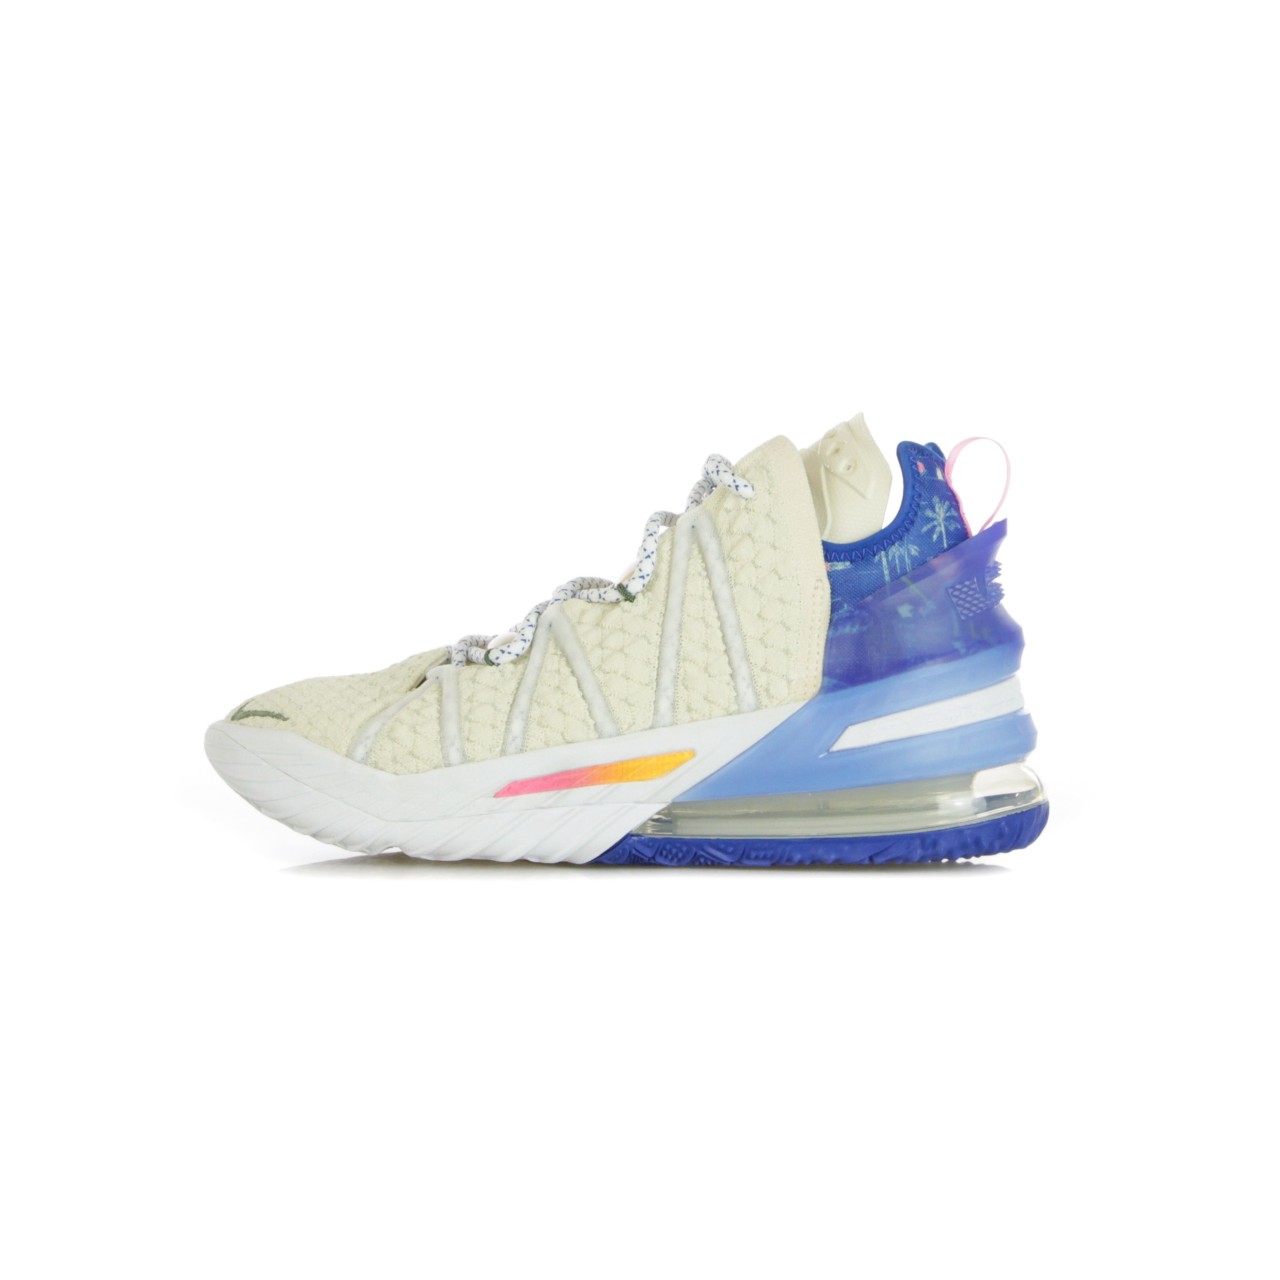 NIKE NBA LEBRON XVIII &quot;LOS ANGELES BY DAY&quot; DB8148-200